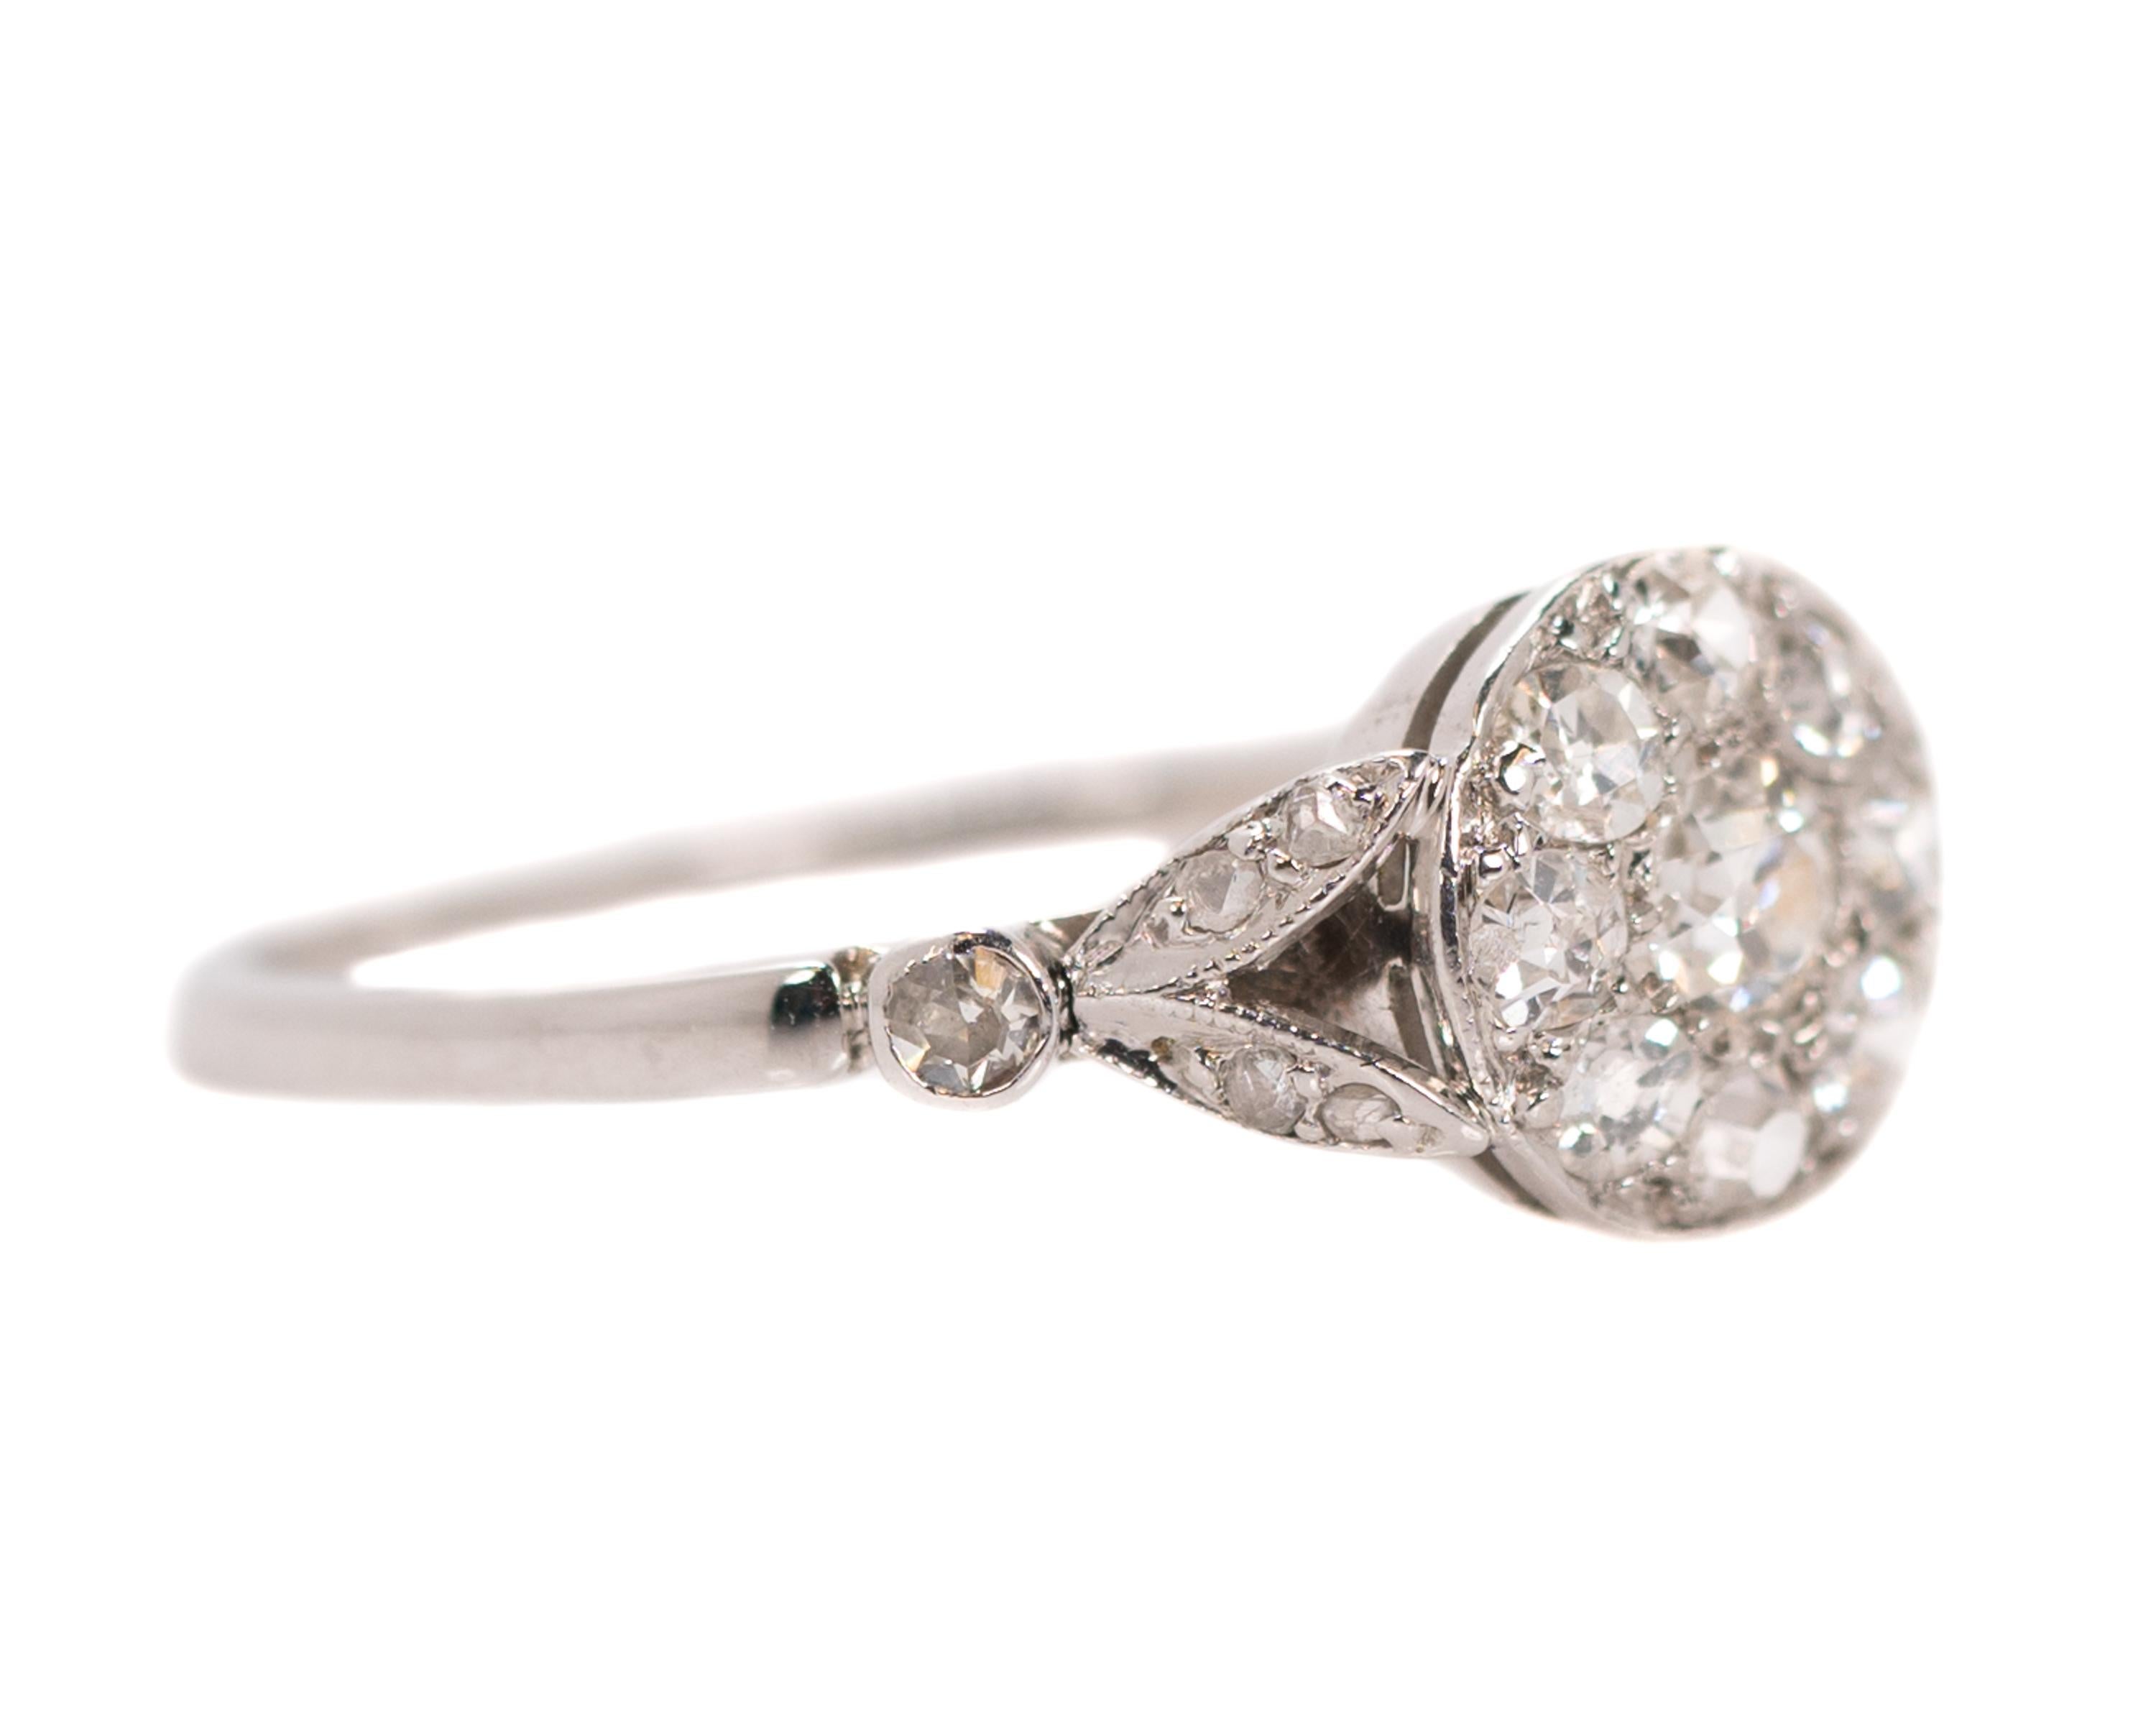 1920s Art Deco Diamond Cluster Ring - 18 Karat White gold, Old Mine Diamonds

Features:
0.60 carat total weight Old Mine Diamonds
18 karat White Gold setting
Open Gallery and Shoulders
Split shank shoulders

Finger to top of stone: 3